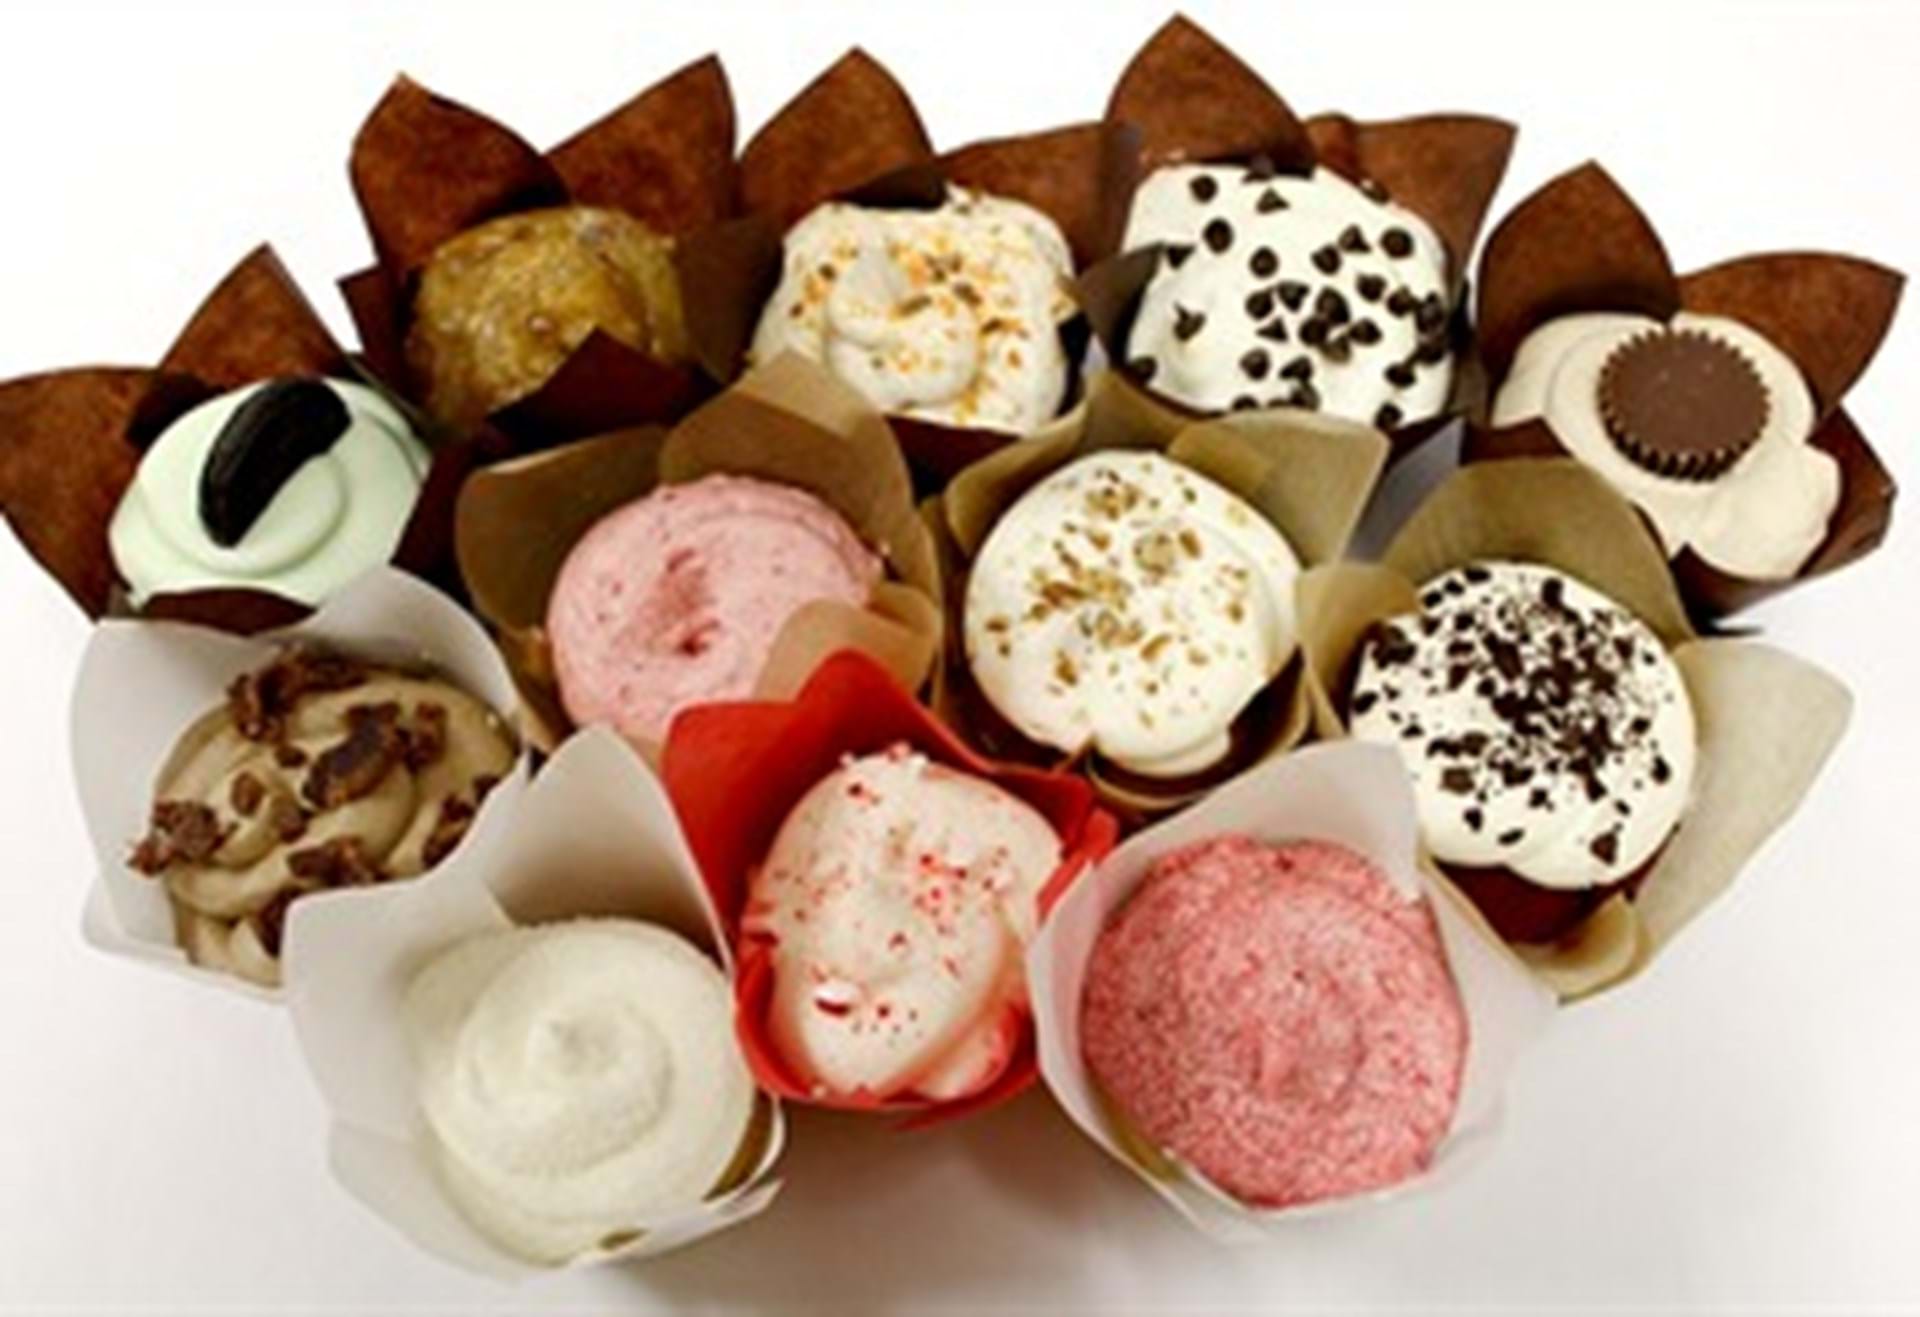 Cupcake Assortment from The Bakery